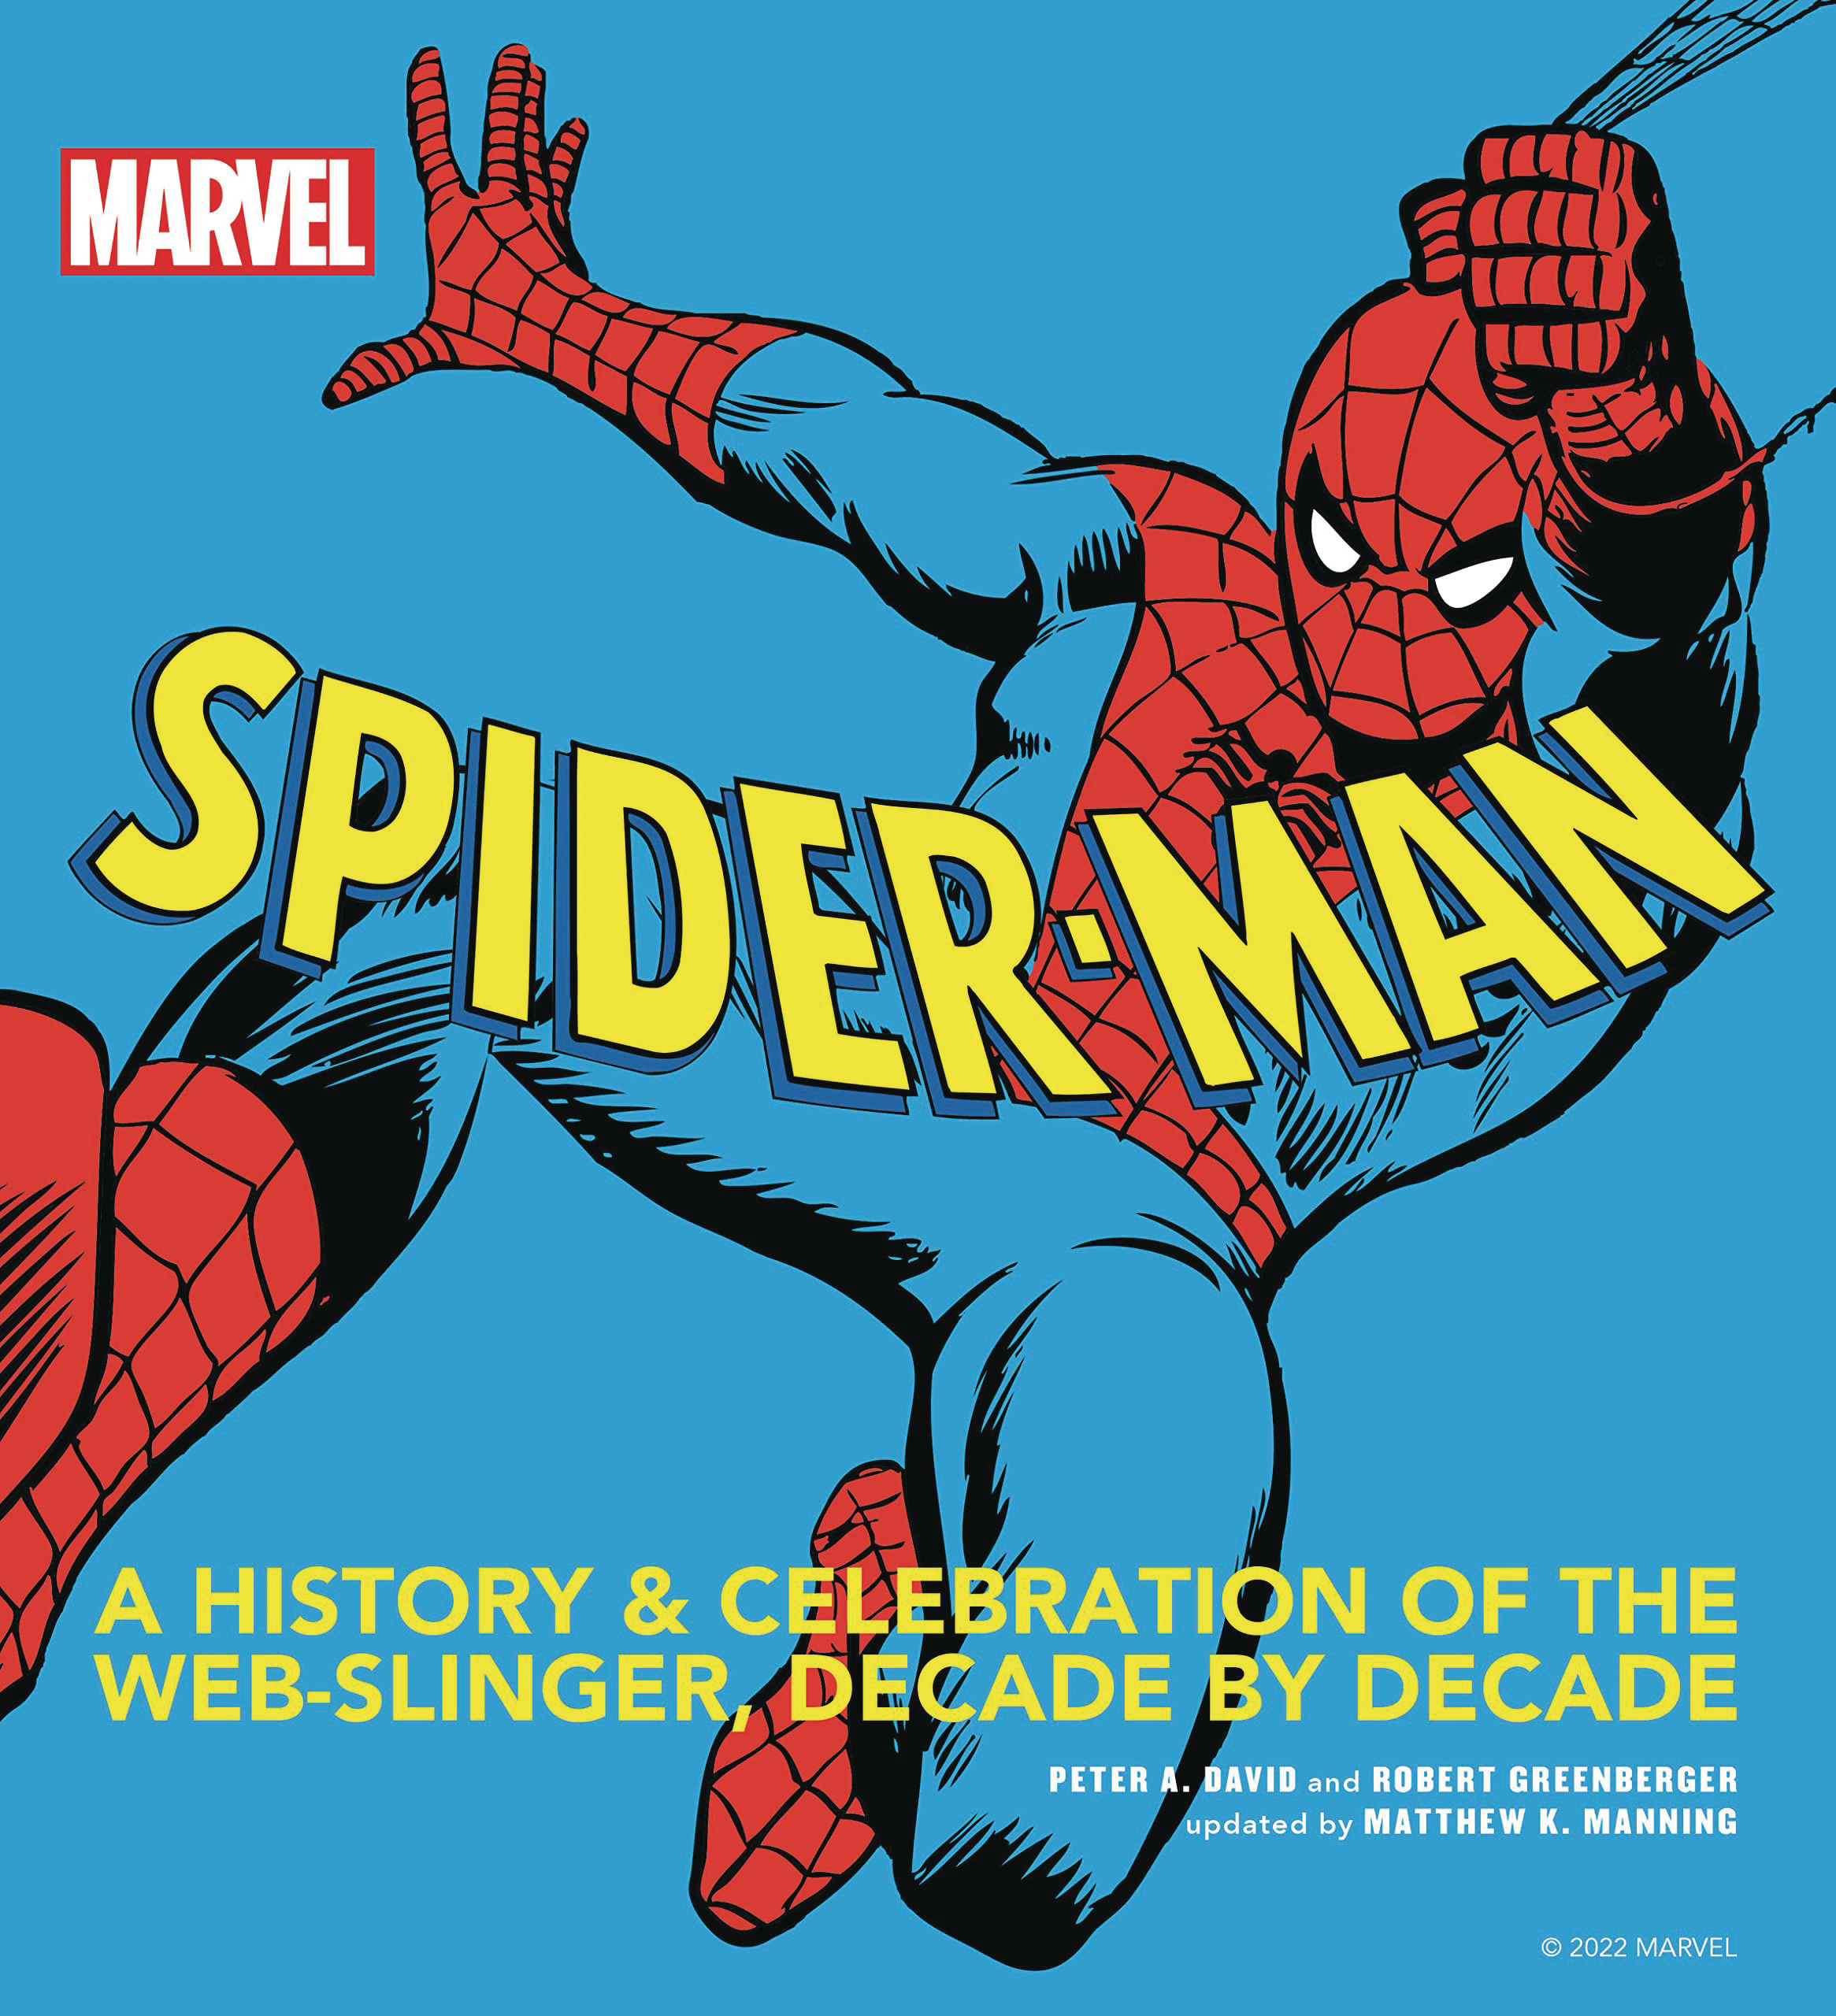 Spider-Man A History And Celebration of the Web-Slinger, Decade by Decade Hardcover